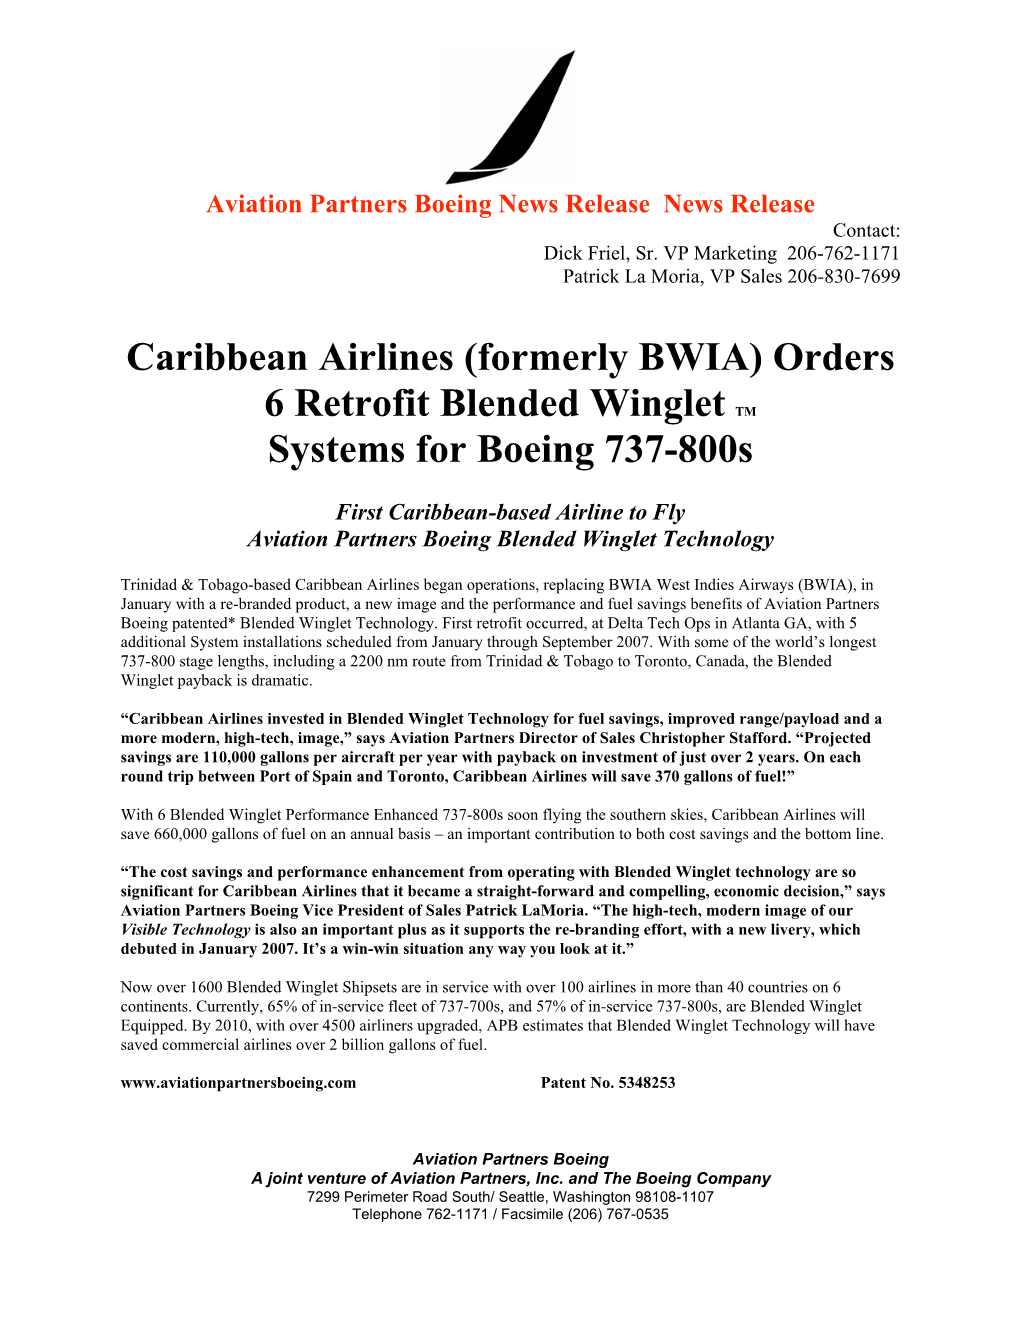 Caribbean Airlines (Formerly BWIA) Orders 6